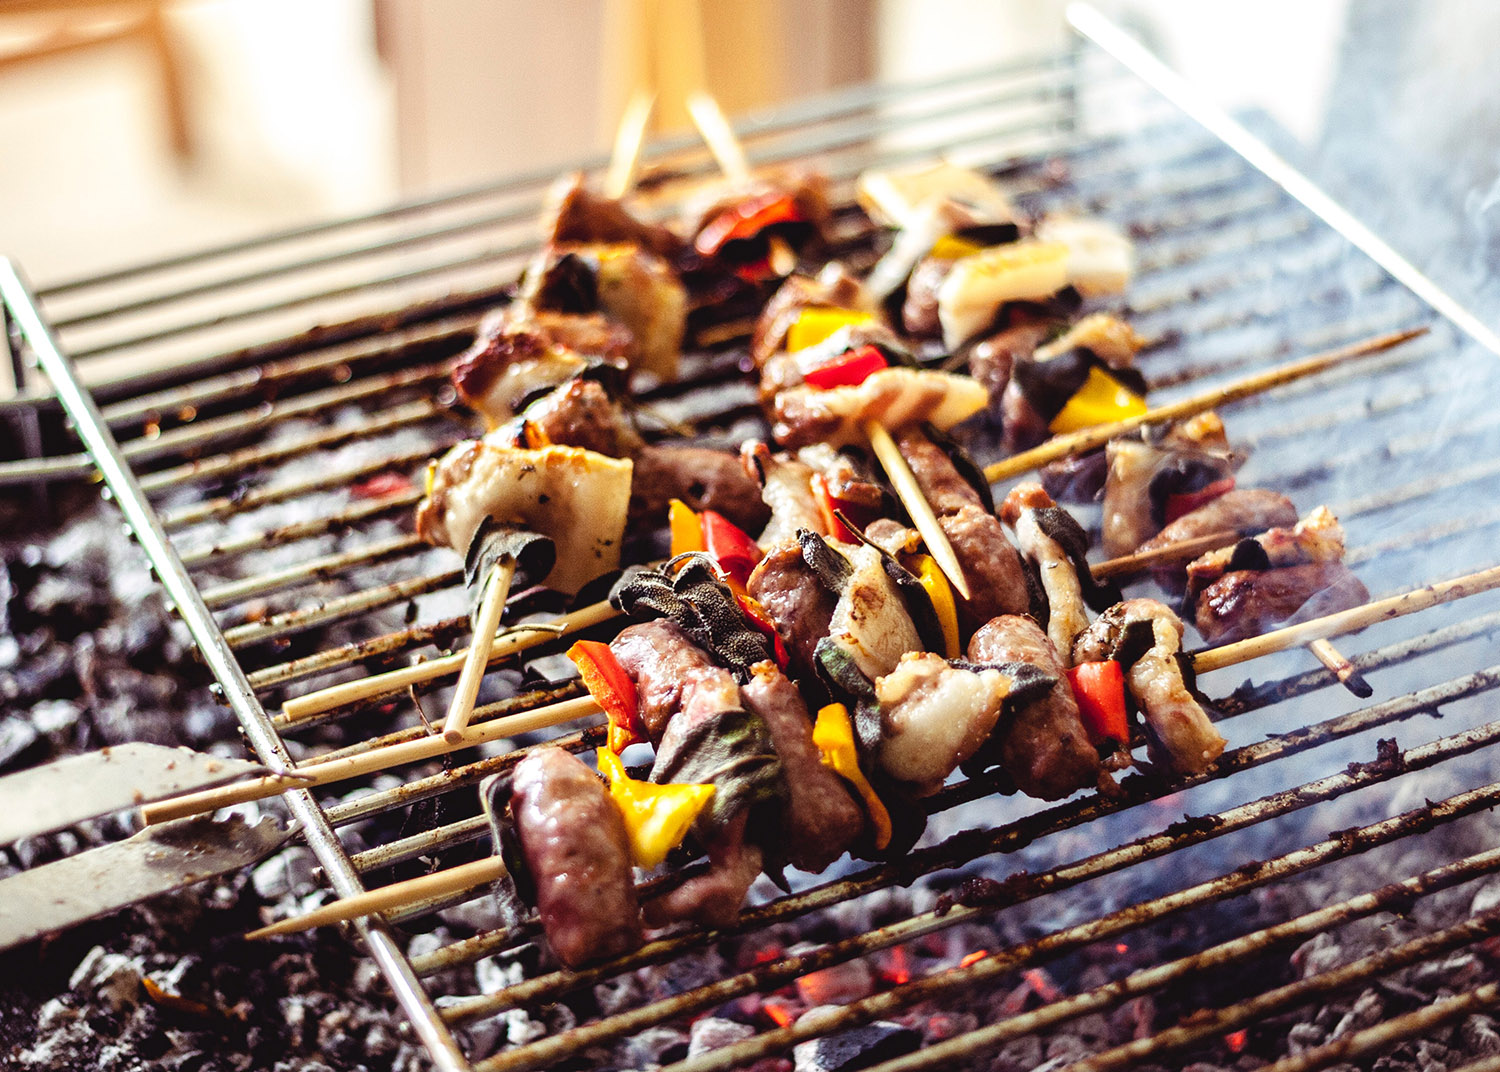 Make Grilling More Fun with These Ideas